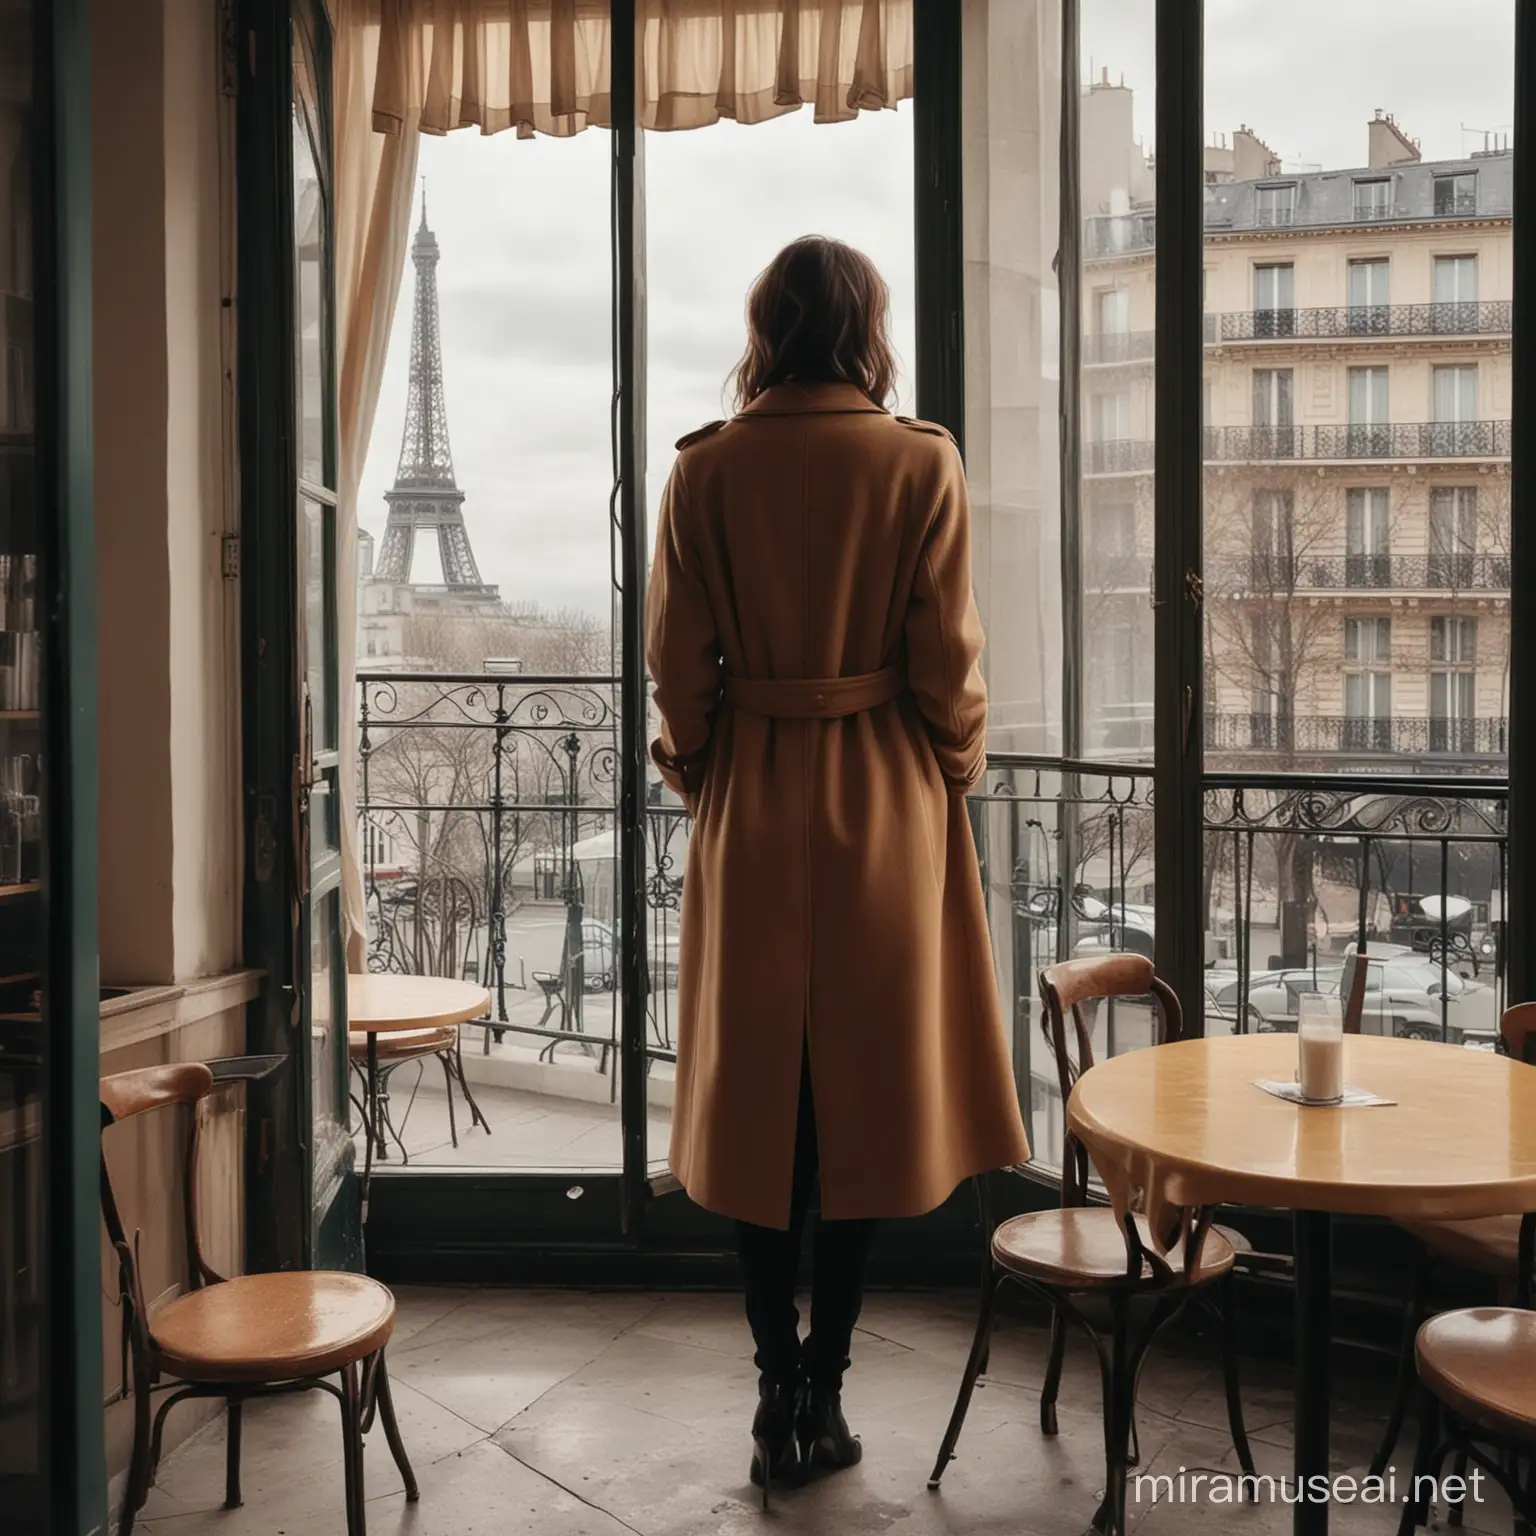 Mysterious Woman in Parisian Caf Overlooking Eiffel Tower